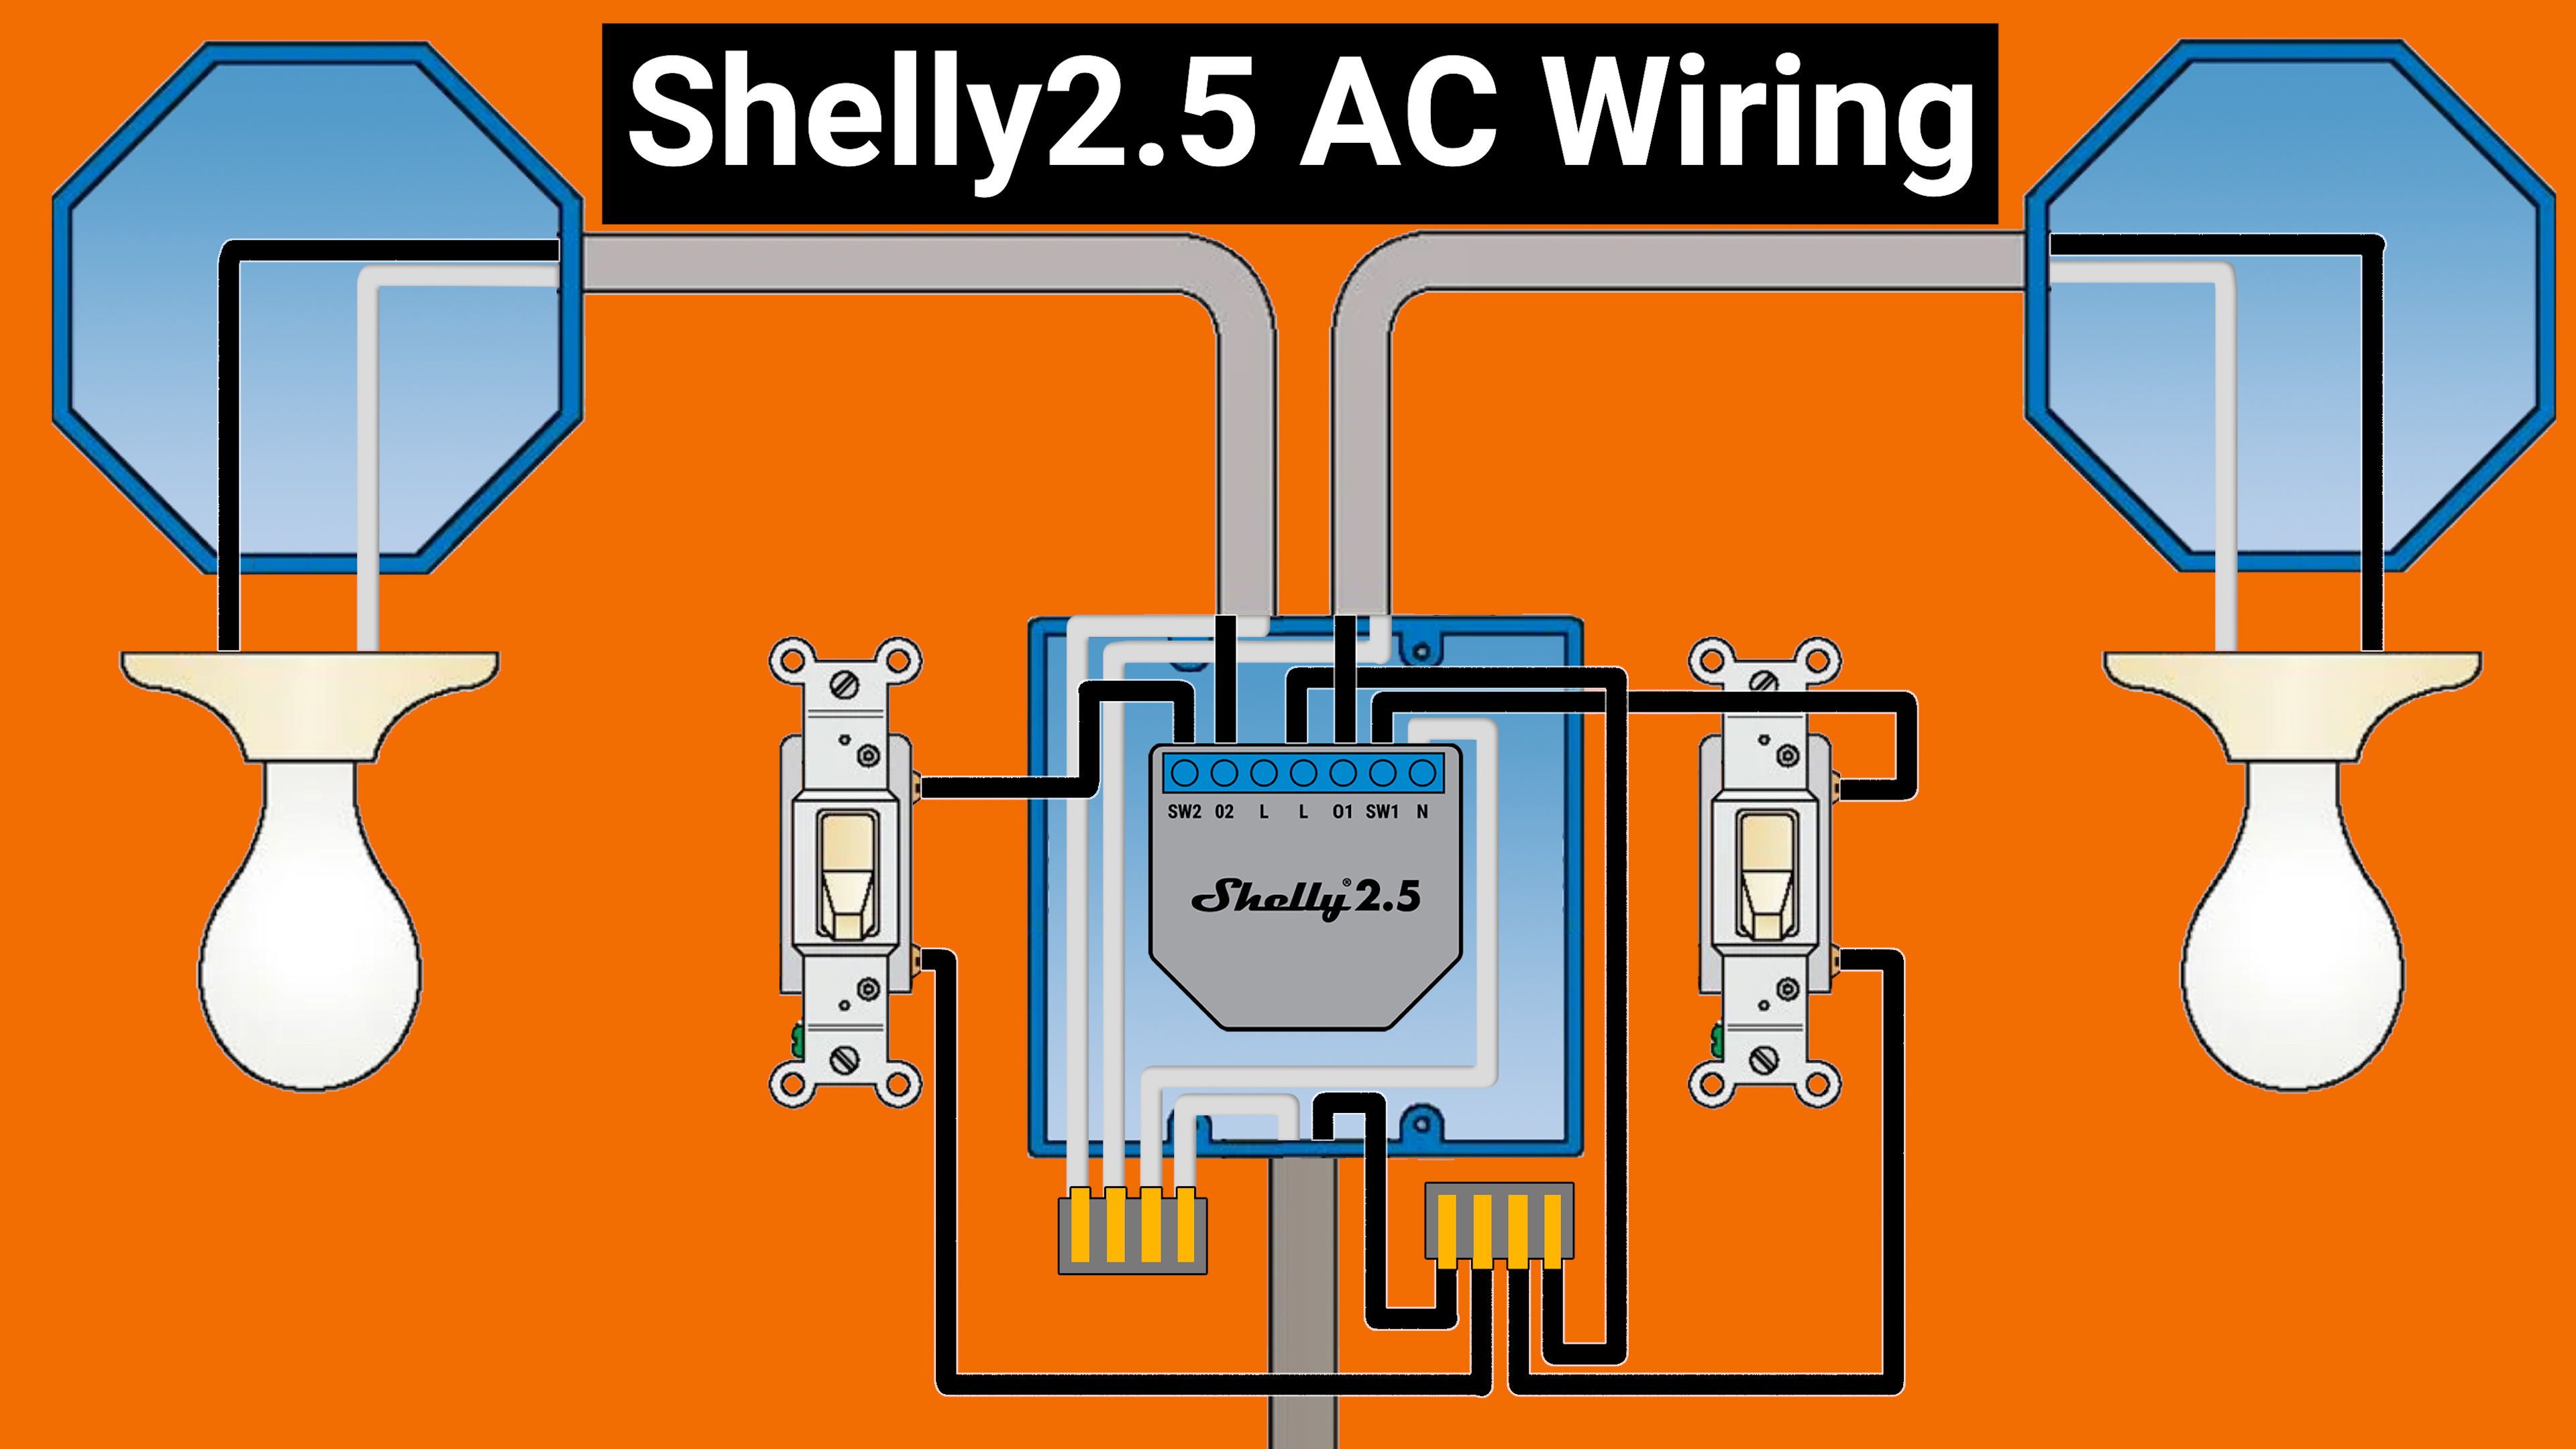 No cover mode for Shelly Plus 2PM - Configuration - Home Assistant